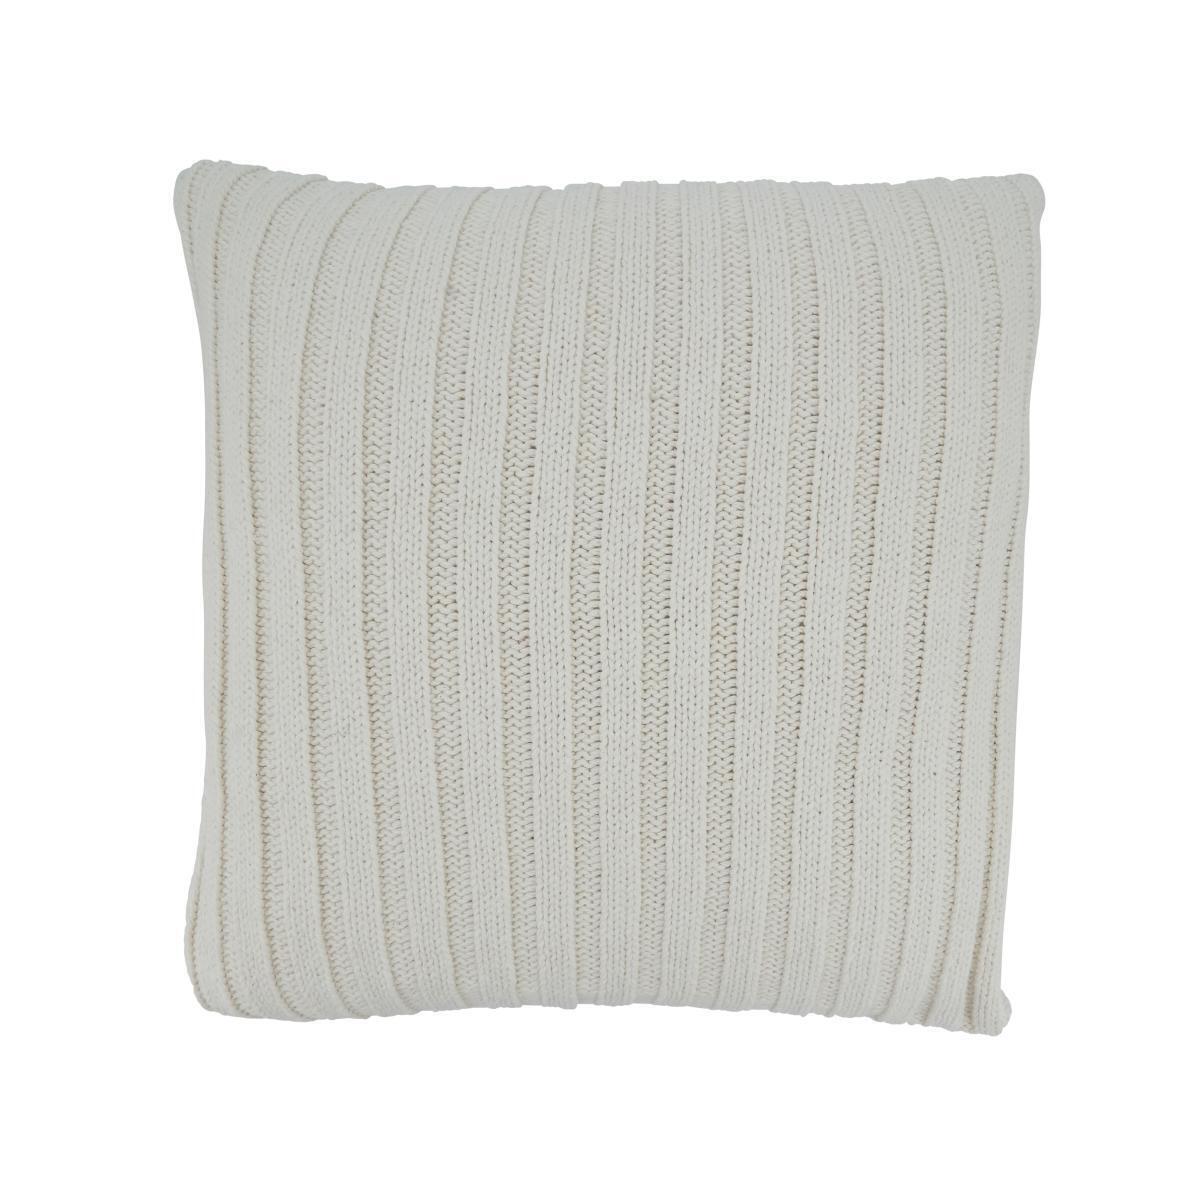 Saro 13120.I20SP 20 in. Knit Design Square Throw Pillow with Poly Insert, Ivory